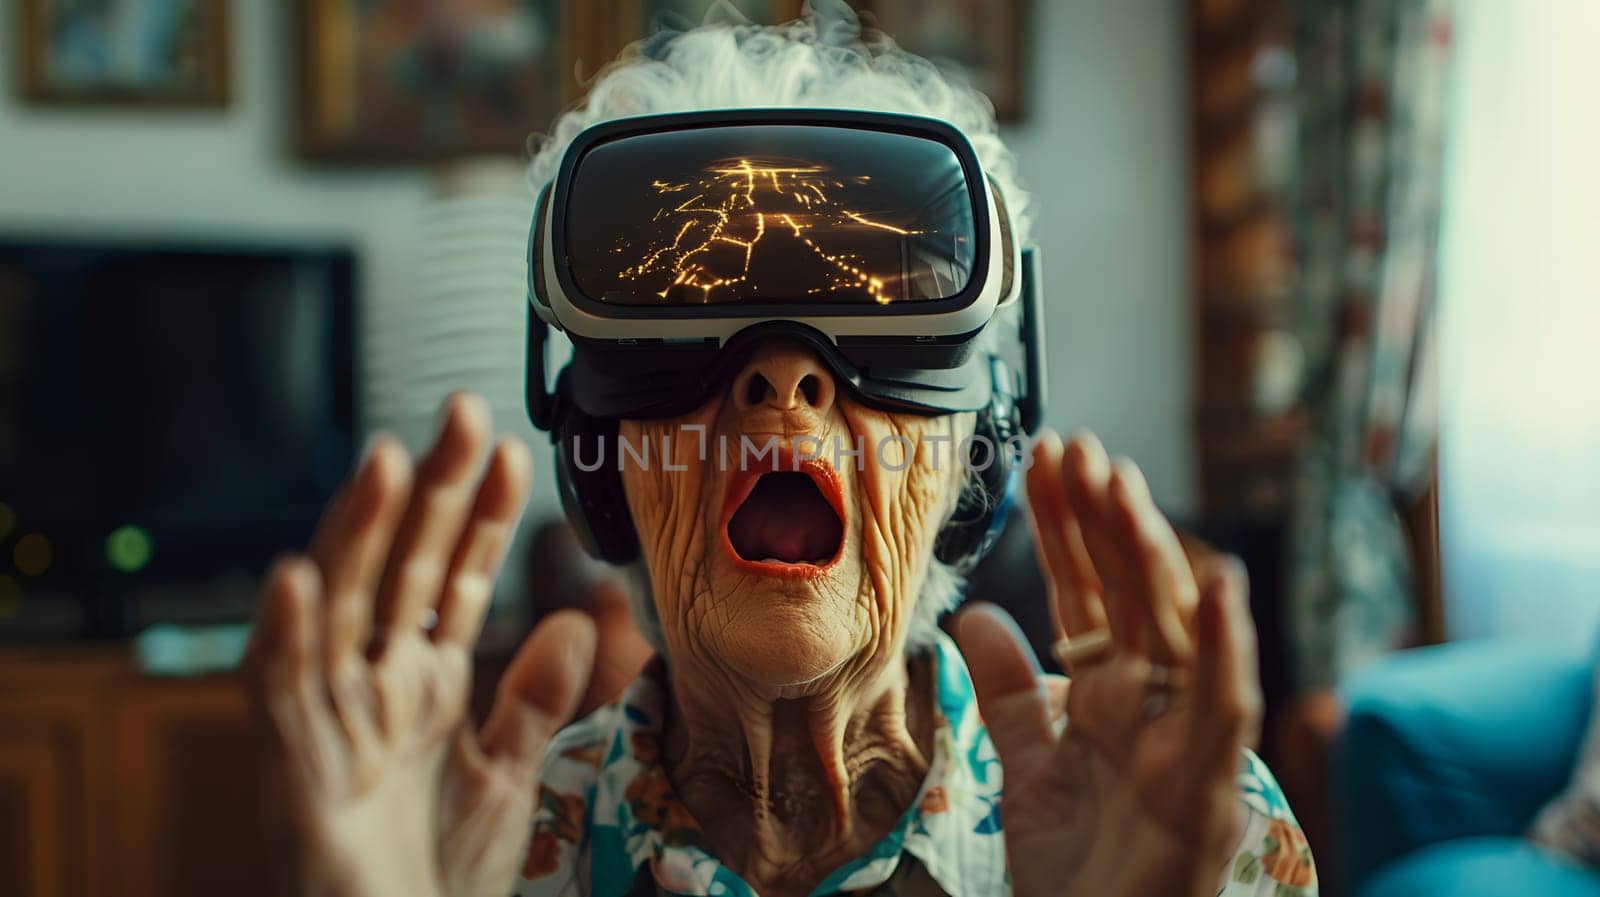 An elderly woman is wearing a virtual reality helmet for entertainment. She is making gestures with her thumb while experiencing a fictional character in a fun, immersive virtual event